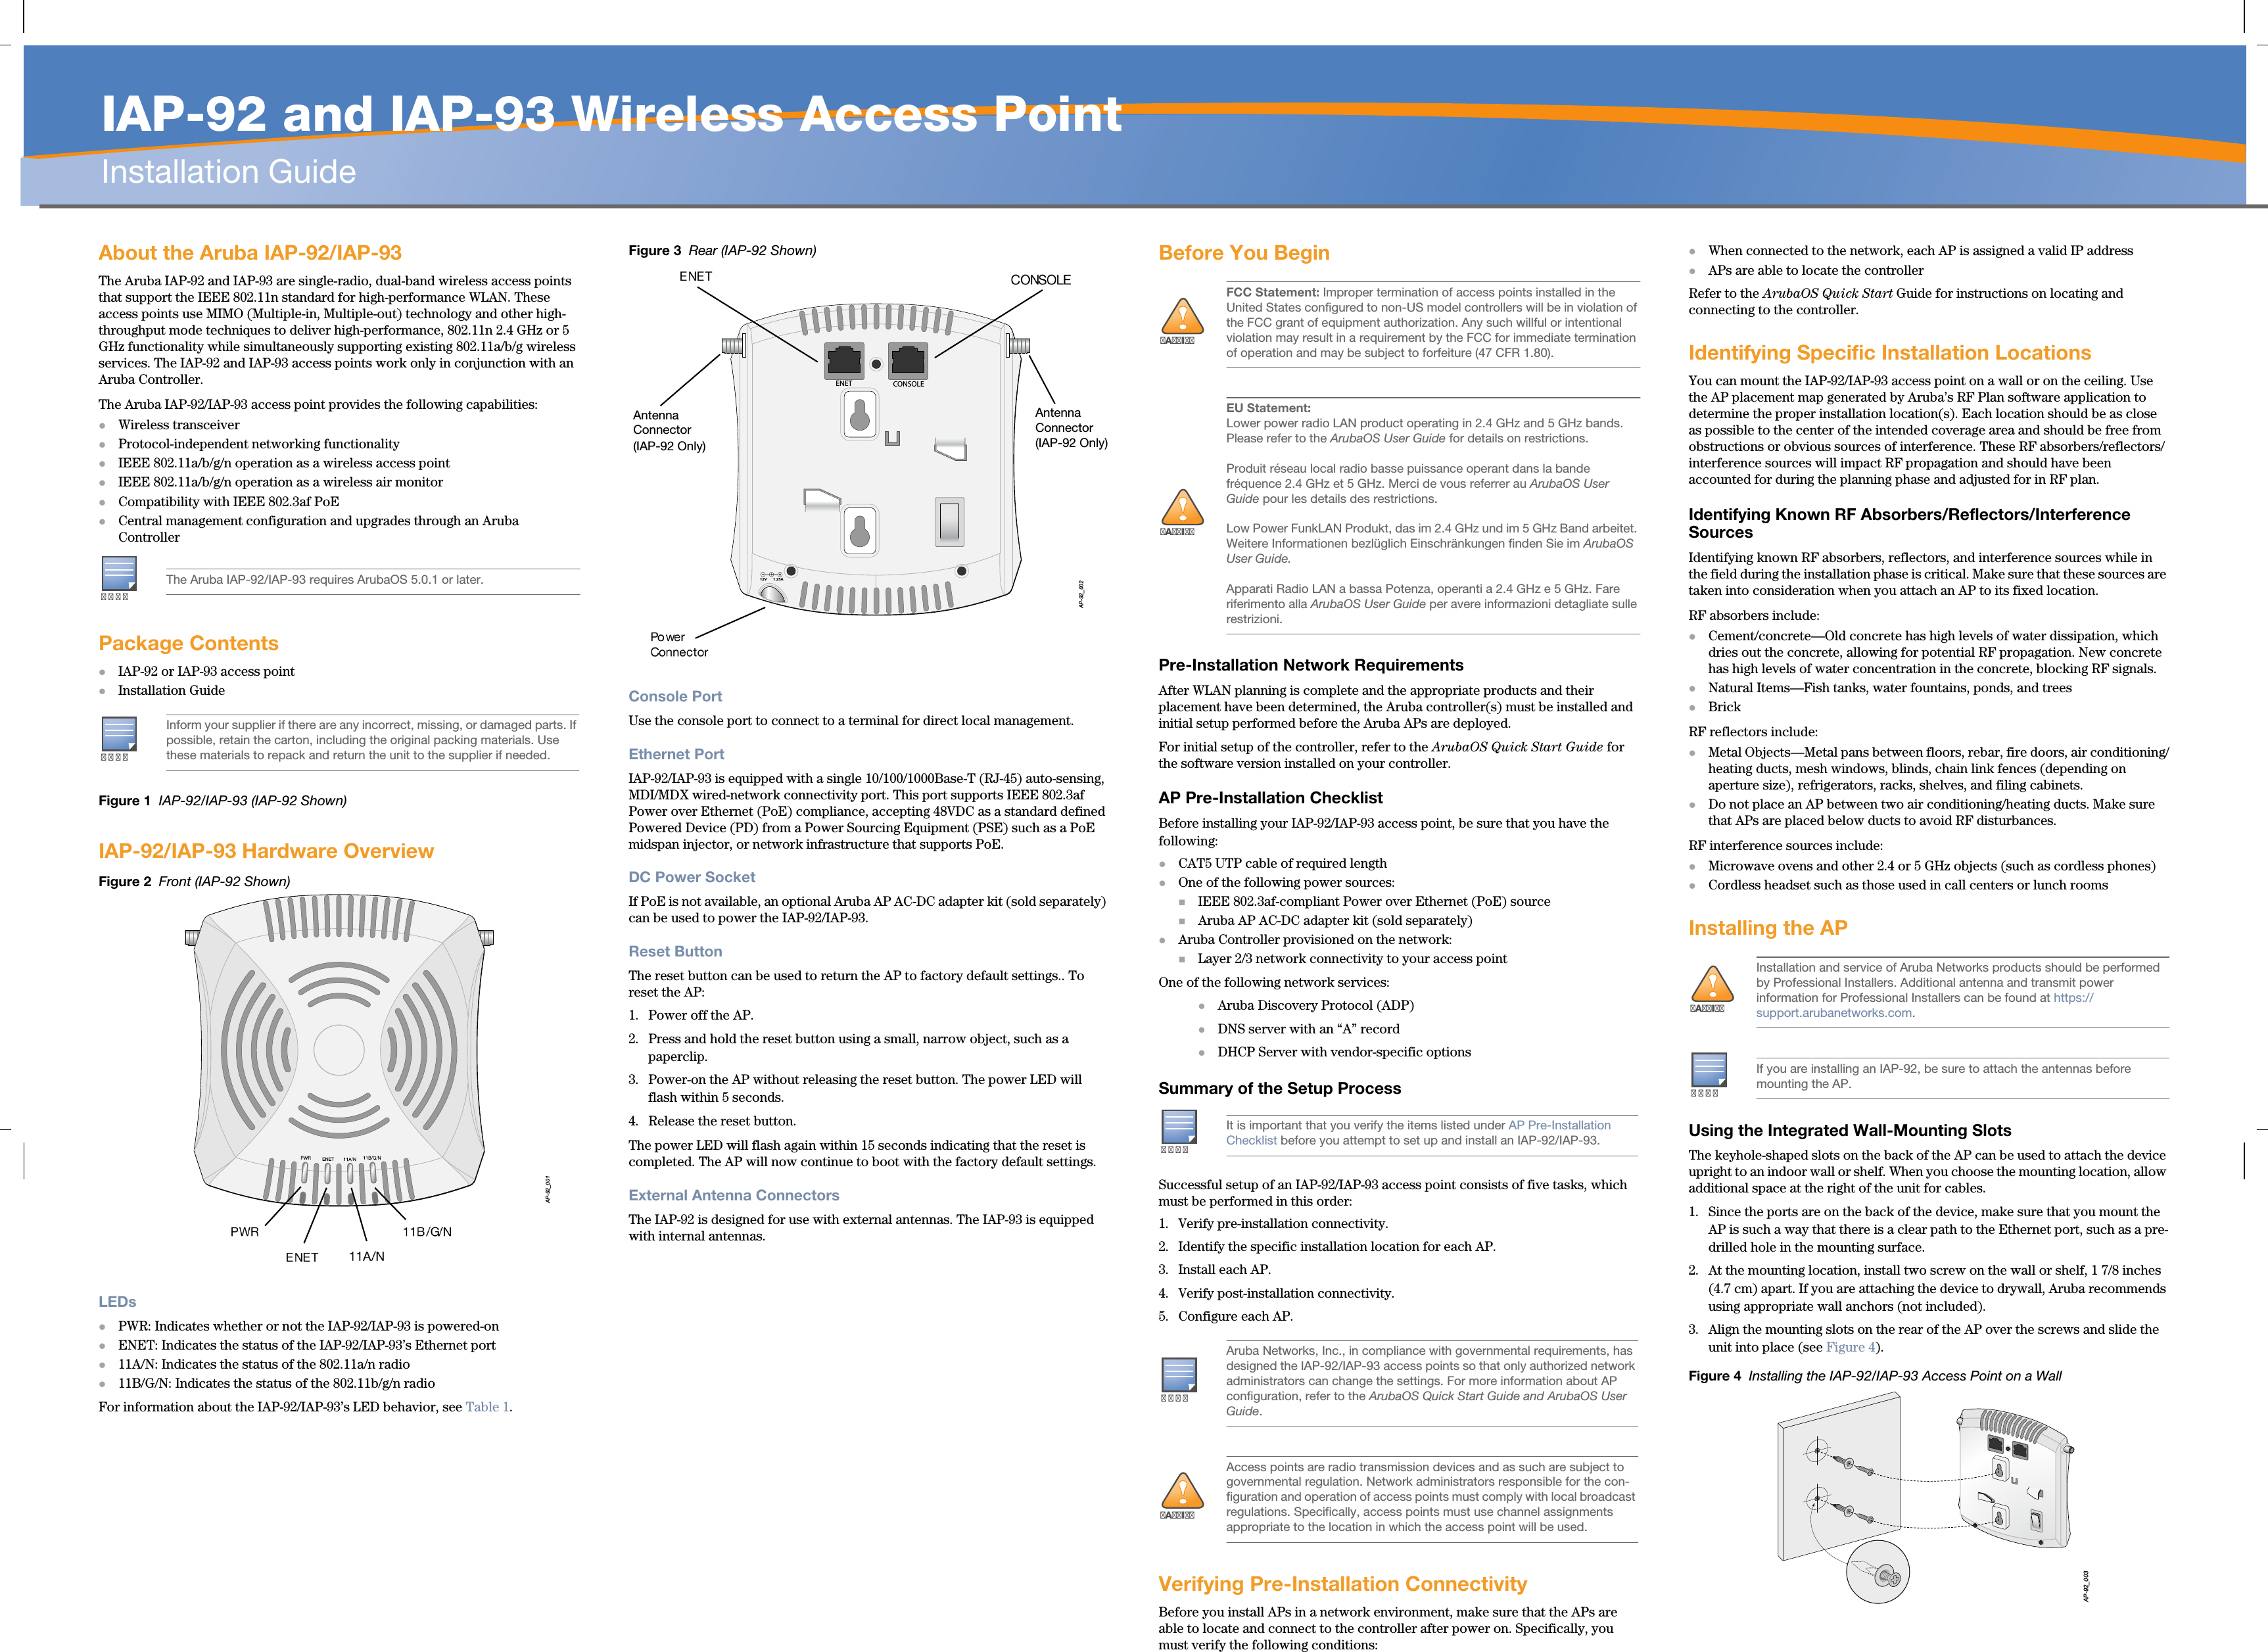   IAP-92 and IAP-93 Wireless Access PointInstallation GuideAbout the Aruba IAP-92/IAP-93The Aruba IAP-92 and IAP-93 are single-radio, dual-band wireless access points that support the IEEE 802.11n standard for high-performance WLAN. These access points use MIMO (Multiple-in, Multiple-out) technology and other high-throughput mode techniques to deliver high-performance, 802.11n 2.4 GHz or 5 GHz functionality while simultaneously supporting existing 802.11a/b/g wireless services. The IAP-92 and IAP-93 access points work only in conjunction with an Aruba Controller.The Aruba IAP-92/IAP-93 access point provides the following capabilities:Wireless transceiverProtocol-independent networking functionalityIEEE 802.11a/b/g/n operation as a wireless access pointIEEE 802.11a/b/g/n operation as a wireless air monitorCompatibility with IEEE 802.3af PoE Central management configuration and upgrades through an Aruba ControllerPackage ContentsIAP-92 or IAP-93 access pointInstallation GuideFigure 1  IAP-92/IAP-93 (IAP-92 Shown)IAP-92/IAP-93 Hardware OverviewFigure 2  Front (IAP-92 Shown)LEDsPWR: Indicates whether or not the IAP-92/IAP-93 is powered-onENET: Indicates the status of the IAP-92/IAP-93’s Ethernet port11A/N: Indicates the status of the 802.11a/n radio11B/G/N: Indicates the status of the 802.11b/g/n radioFor information about the IAP-92/IAP-93’s LED behavior, see Table 1.Figure 3  Rear (IAP-92 Shown)Console PortUse the console port to connect to a terminal for direct local management.Ethernet PortIAP-92/IAP-93 is equipped with a single 10/100/1000Base-T (RJ-45) auto-sensing, MDI/MDX wired-network connectivity port. This port supports IEEE 802.3af Power over Ethernet (PoE) compliance, accepting 48VDC as a standard defined Powered Device (PD) from a Power Sourcing Equipment (PSE) such as a PoE midspan injector, or network infrastructure that supports PoE.DC Power SocketIf PoE is not available, an optional Aruba AP AC-DC adapter kit (sold separately) can be used to power the IAP-92/IAP-93.Reset ButtonThe reset button can be used to return the AP to factory default settings.. To reset the AP:1. Power off the AP.2. Press and hold the reset button using a small, narrow object, such as a paperclip.3. Power-on the AP without releasing the reset button. The power LED will flash within 5 seconds.4. Release the reset button.The power LED will flash again within 15 seconds indicating that the reset is completed. The AP will now continue to boot with the factory default settings.External Antenna ConnectorsThe IAP-92 is designed for use with external antennas. The IAP-93 is equipped with internal antennas.Before You BeginPre-Installation Network RequirementsAfter WLAN planning is complete and the appropriate products and their placement have been determined, the Aruba controller(s) must be installed and initial setup performed before the Aruba APs are deployed.For initial setup of the controller, refer to the ArubaOS Quick Start Guide for the software version installed on your controller.AP Pre-Installation ChecklistBefore installing your IAP-92/IAP-93 access point, be sure that you have the following:CAT5 UTP cable of required lengthOne of the following power sources:IEEE 802.3af-compliant Power over Ethernet (PoE) sourceAruba AP AC-DC adapter kit (sold separately)Aruba Controller provisioned on the network:Layer 2/3 network connectivity to your access pointOne of the following network services:Aruba Discovery Protocol (ADP)DNS server with an “A” recordDHCP Server with vendor-specific optionsSummary of the Setup ProcessSuccessful setup of an IAP-92/IAP-93 access point consists of five tasks, which must be performed in this order:1. Verify pre-installation connectivity.2. Identify the specific installation location for each AP.3. Install each AP.4. Verify post-installation connectivity.5. Configure each AP.Verifying Pre-Installation ConnectivityBefore you install APs in a network environment, make sure that the APs are able to locate and connect to the controller after power on. Specifically, you must verify the following conditions:When connected to the network, each AP is assigned a valid IP addressAPs are able to locate the controller Refer to the ArubaOS Quick Start Guide for instructions on locating and connecting to the controller.Identifying Specific Installation LocationsYou can mount the IAP-92/IAP-93 access point on a wall or on the ceiling. Use the AP placement map generated by Aruba’s RF Plan software application to determine the proper installation location(s). Each location should be as close as possible to the center of the intended coverage area and should be free from obstructions or obvious sources of interference. These RF absorbers/reflectors/interference sources will impact RF propagation and should have been accounted for during the planning phase and adjusted for in RF plan.Identifying Known RF Absorbers/Reflectors/Interference SourcesIdentifying known RF absorbers, reflectors, and interference sources while in the field during the installation phase is critical. Make sure that these sources are taken into consideration when you attach an AP to its fixed location.RF absorbers include:Cement/concrete—Old concrete has high levels of water dissipation, which dries out the concrete, allowing for potential RF propagation. New concrete has high levels of water concentration in the concrete, blocking RF signals.Natural Items—Fish tanks, water fountains, ponds, and treesBrickRF reflectors include:Metal Objects—Metal pans between floors, rebar, fire doors, air conditioning/heating ducts, mesh windows, blinds, chain link fences (depending on aperture size), refrigerators, racks, shelves, and filing cabinets.Do not place an AP between two air conditioning/heating ducts. Make sure that APs are placed below ducts to avoid RF disturbances.RF interference sources include:Microwave ovens and other 2.4 or 5 GHz objects (such as cordless phones)Cordless headset such as those used in call centers or lunch roomsInstalling the APUsing the Integrated Wall-Mounting SlotsThe keyhole-shaped slots on the back of the AP can be used to attach the device upright to an indoor wall or shelf. When you choose the mounting location, allow additional space at the right of the unit for cables.1. Since the ports are on the back of the device, make sure that you mount the AP is such a way that there is a clear path to the Ethernet port, such as a pre-drilled hole in the mounting surface.2. At the mounting location, install two screw on the wall or shelf, 1 7/8 inches (4.7 cm) apart. If you are attaching the device to drywall, Aruba recommends using appropriate wall anchors (not included).3. Align the mounting slots on the rear of the AP over the screws and slide the unit into place (see Figure 4).Figure 4  Installing the IAP-92/IAP-93 Access Point on a WallThe Aruba IAP-92/IAP-93 requires ArubaOS 5.0.1 or later.Inform your supplier if there are any incorrect, missing, or damaged parts. If possible, retain the carton, including the original packing materials. Use these materials to repack and return the unit to the supplier if needed.AP-92_001AP-92_002CONSOLEENET12V       1.25AAntenna Connector (IAP-92 Only)Antenna Connector(IAP-92 Only)!AIFCC Statement: Improper termination of access points installed in the United States configured to non-US model controllers will be in violation of the FCC grant of equipment authorization. Any such willful or intentional violation may result in a requirement by the FCC for immediate termination of operation and may be subject to forfeiture (47 CFR 1.80).!AIEU Statement: Lower power radio LAN product operating in 2.4 GHz and 5 GHz bands. Please refer to the ArubaOS User Guide for details on restrictions.Produit réseau local radio basse puissance operant dans la bande fréquence 2.4 GHz et 5 GHz. Merci de vous referrer au ArubaOS User Guide pour les details des restrictions.Low Power FunkLAN Produkt, das im 2.4 GHz und im 5 GHz Band arbeitet. Weitere Informationen bezlüglich Einschränkungen finden Sie im ArubaOS User Guide.Apparati Radio LAN a bassa Potenza, operanti a 2.4 GHz e 5 GHz. Fare riferimento alla ArubaOS User Guide per avere informazioni detagliate sulle restrizioni.It is important that you verify the items listed under AP Pre-Installation Checklist before you attempt to set up and install an IAP-92/IAP-93.Aruba Networks, Inc., in compliance with governmental requirements, has designed the IAP-92/IAP-93 access points so that only authorized network administrators can change the settings. For more information about AP configuration, refer to the ArubaOS Quick Start Guide and ArubaOS User Guide.!AIAccess points are radio transmission devices and as such are subject to governmental regulation. Network administrators responsible for the con-figuration and operation of access points must comply with local broadcast regulations. Specifically, access points must use channel assignments appropriate to the location in which the access point will be used.!AIInstallation and service of Aruba Networks products should be performed by Professional Installers. Additional antenna and transmit power information for Professional Installers can be found at https://support.arubanetworks.com.If you are installing an IAP-92, be sure to attach the antennas before mounting the AP.AP-92_003